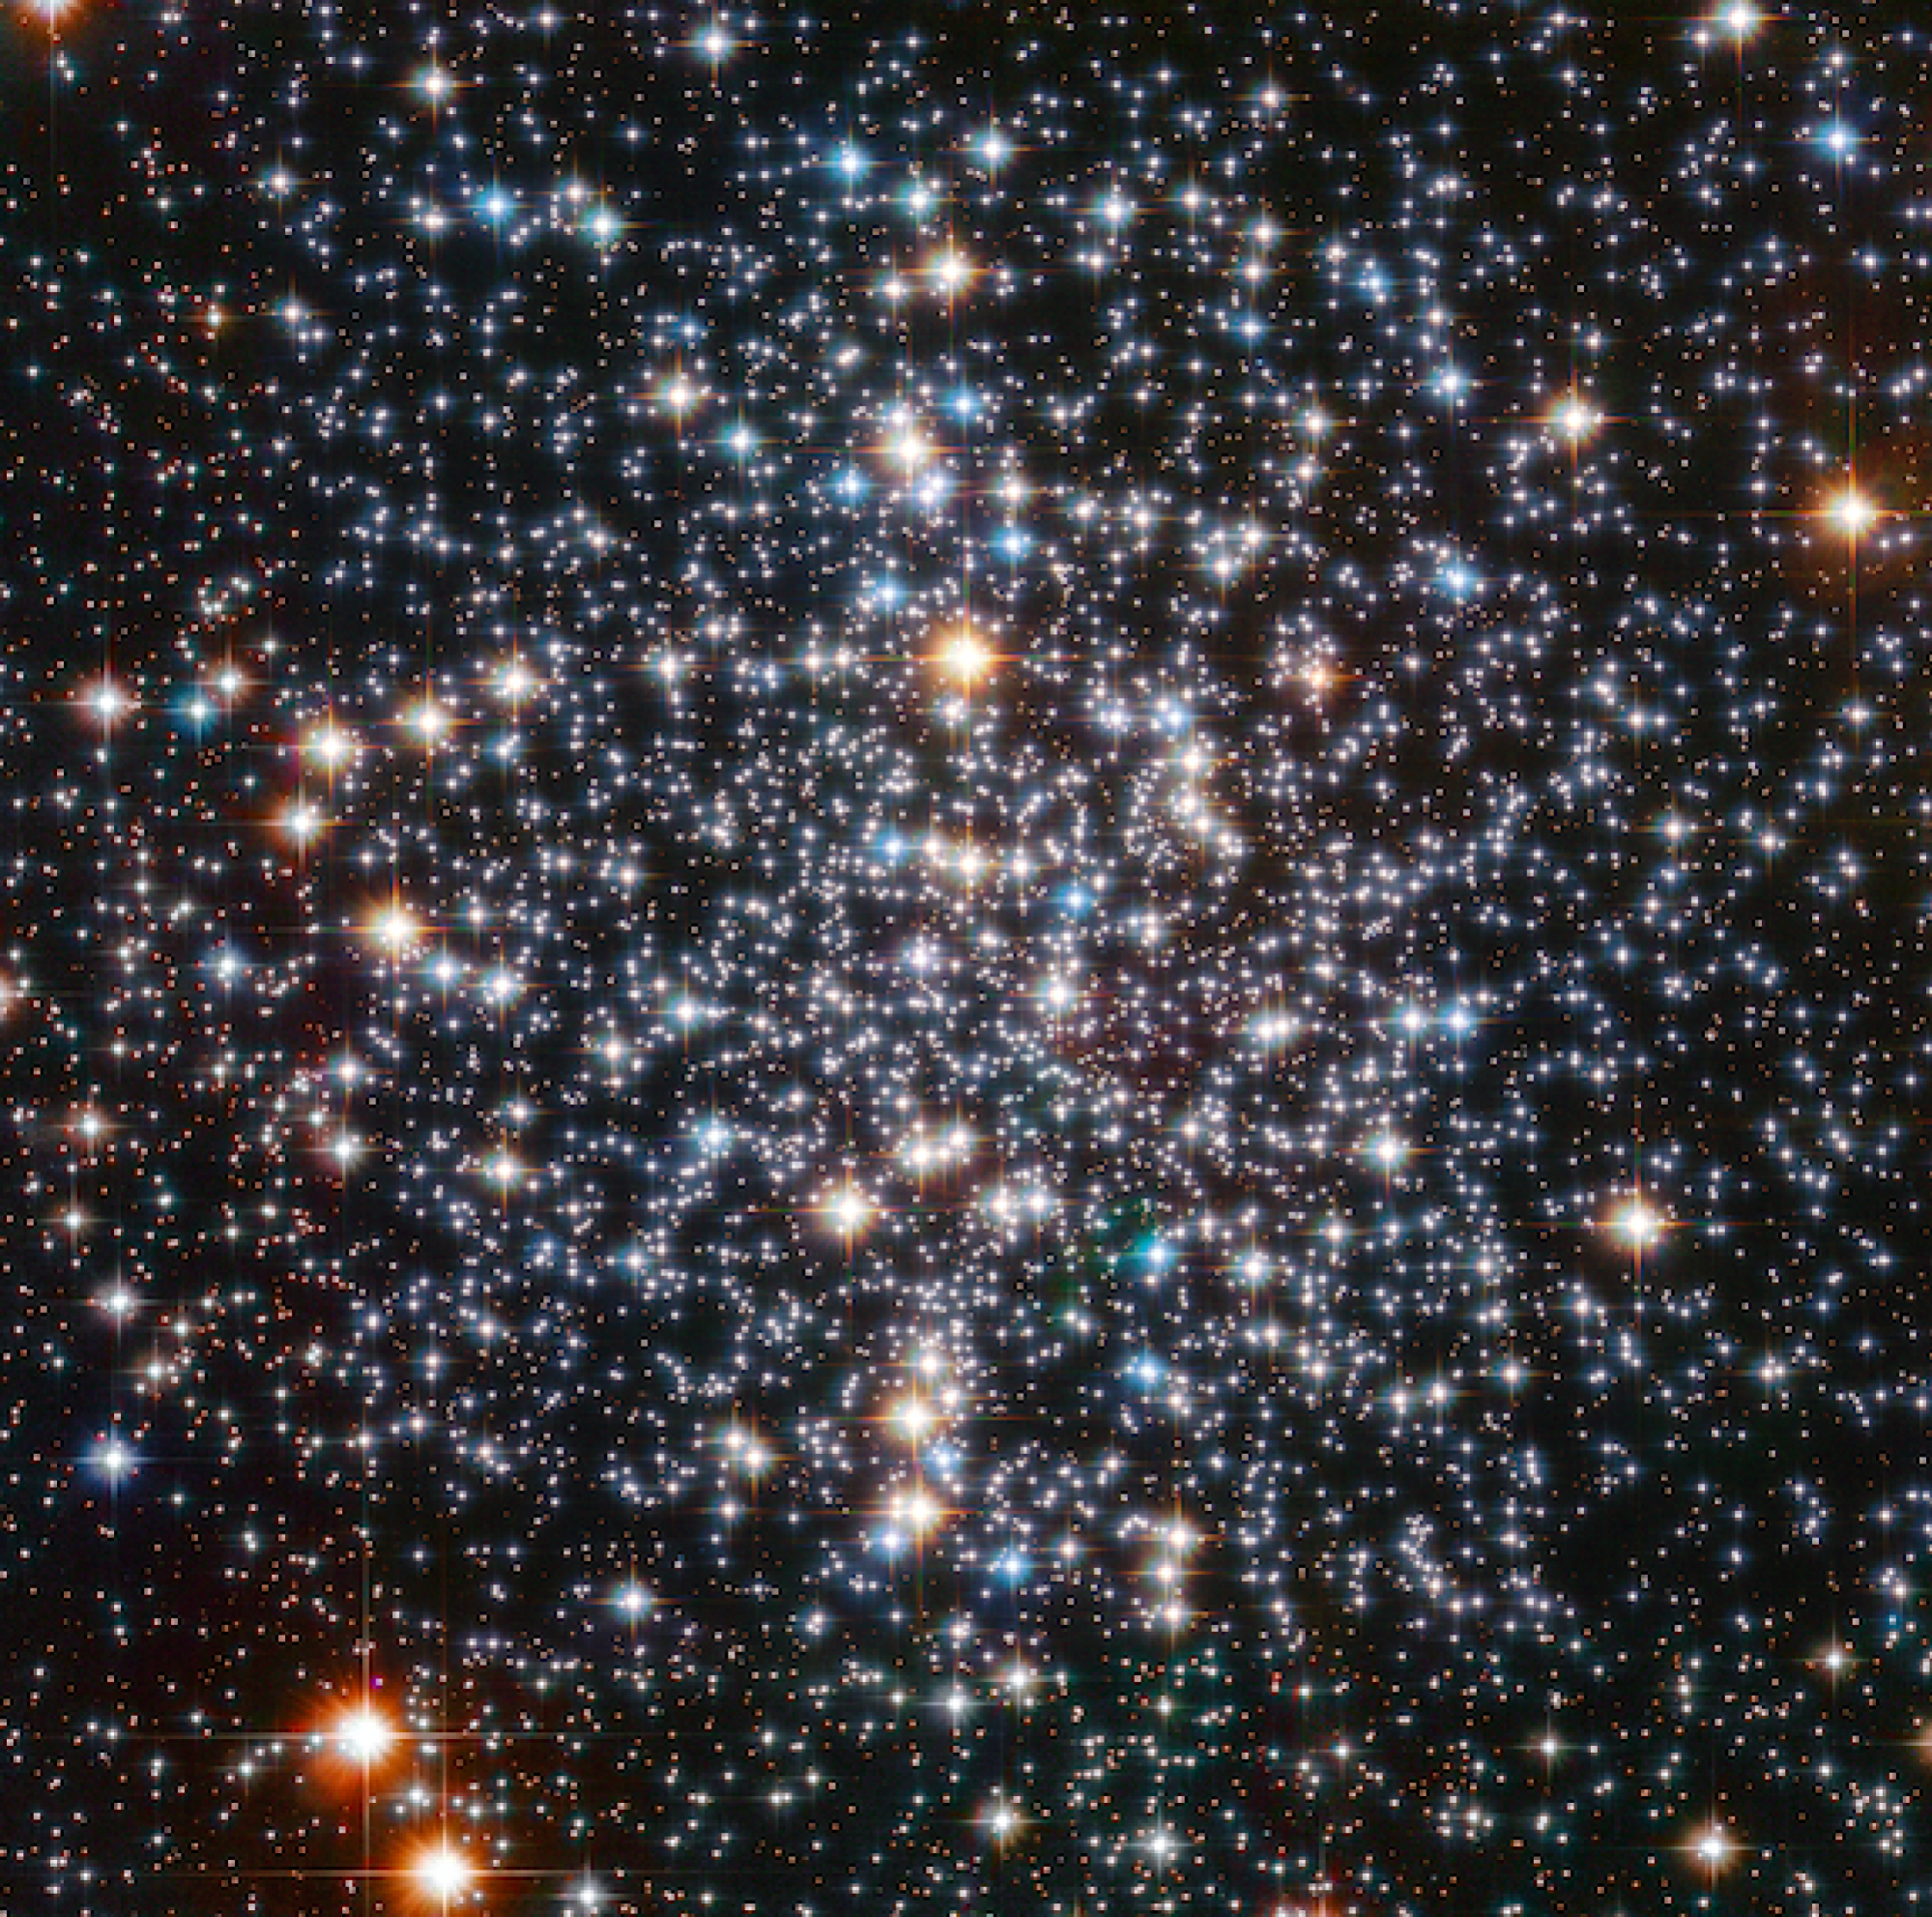 The star cluster Messier 4 contains hundreds of thousands of stars.